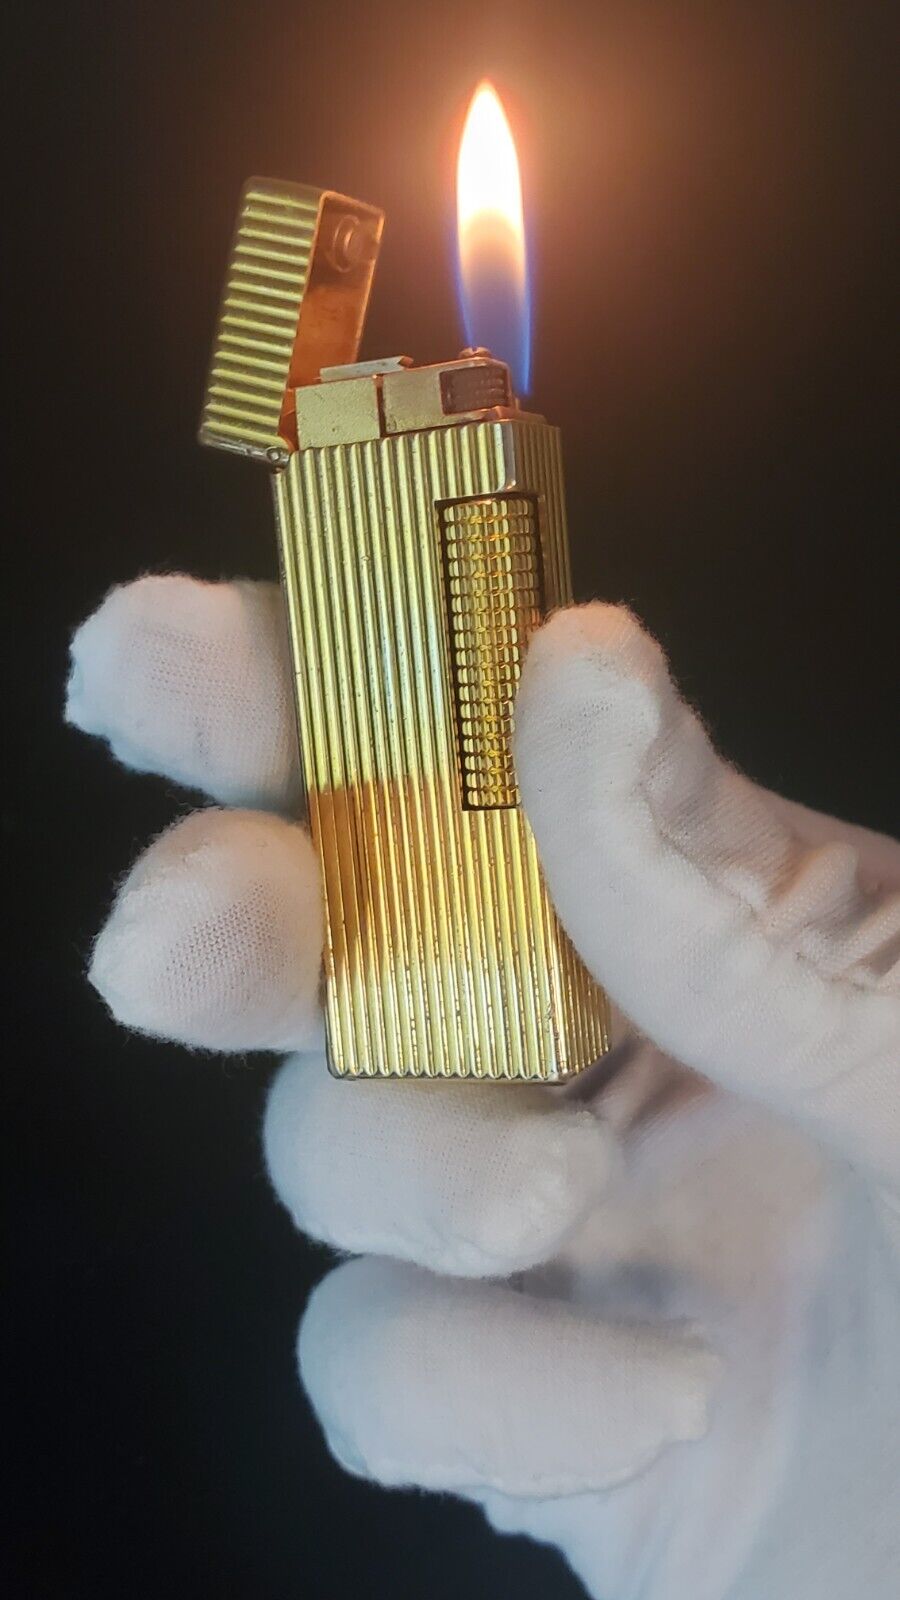 Dunhill Rollagas Lighter Gold Plated With Vertical Lines Pattern